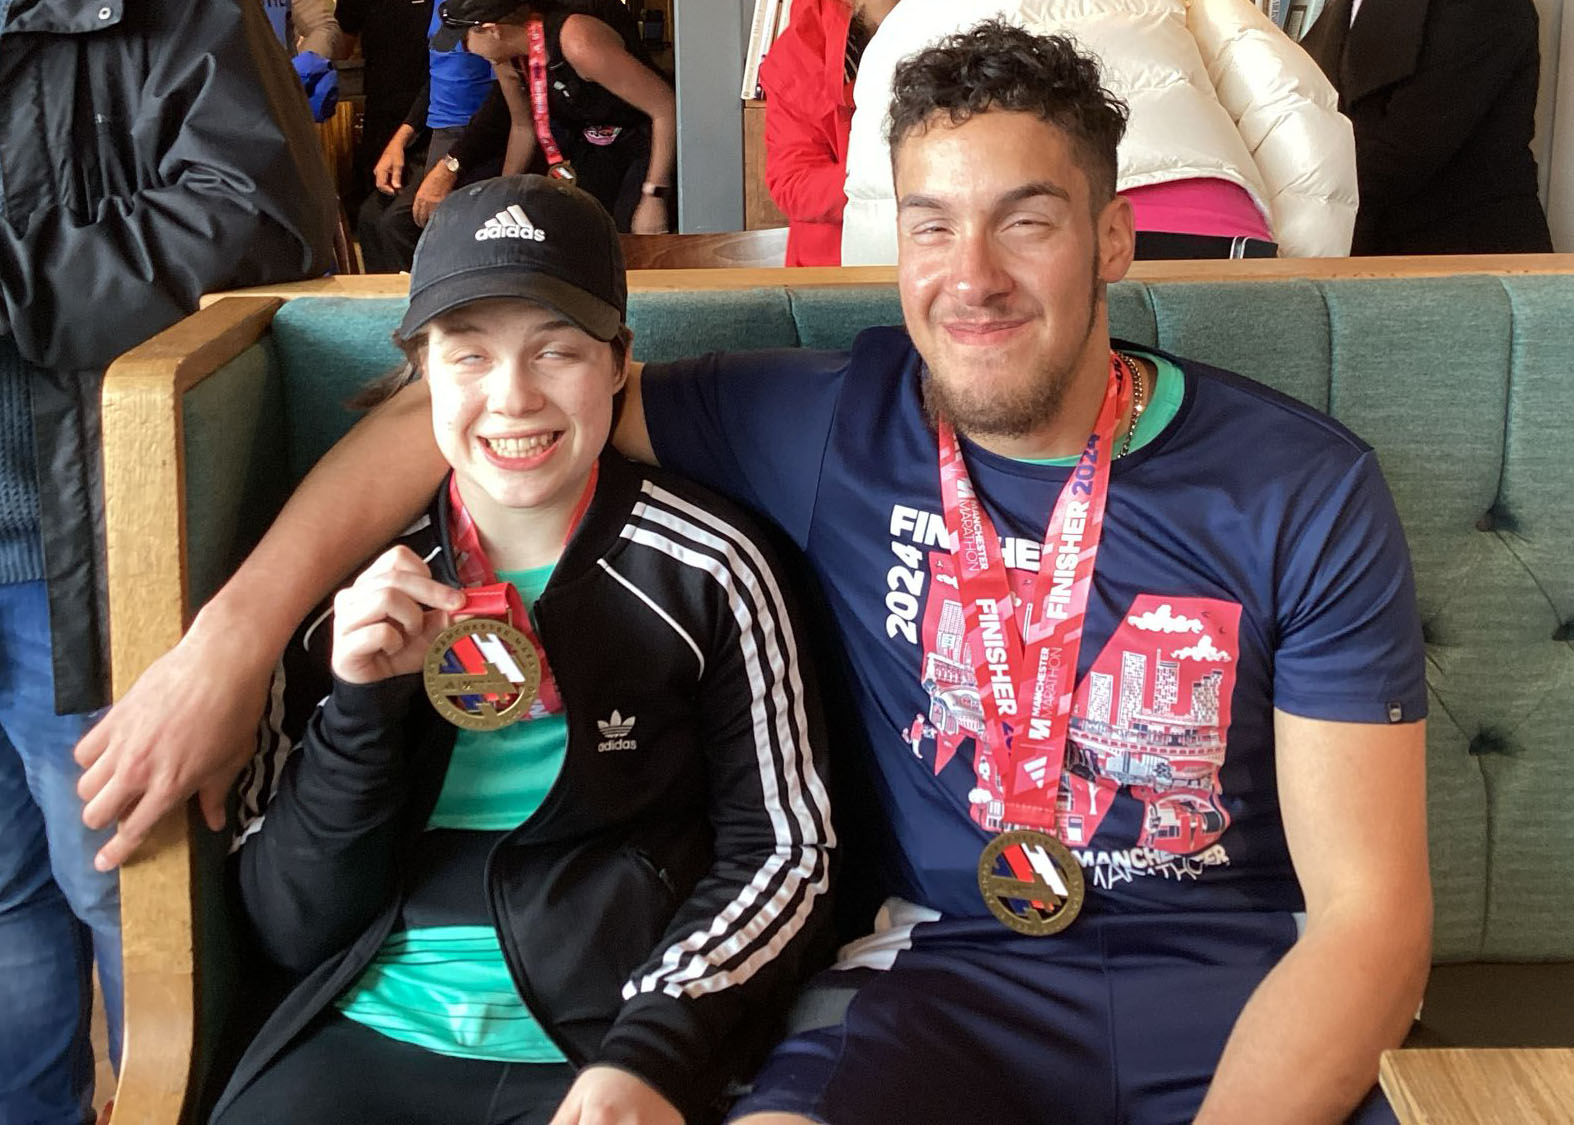 sitting next to each other both with beaming smiles and holding up their medals